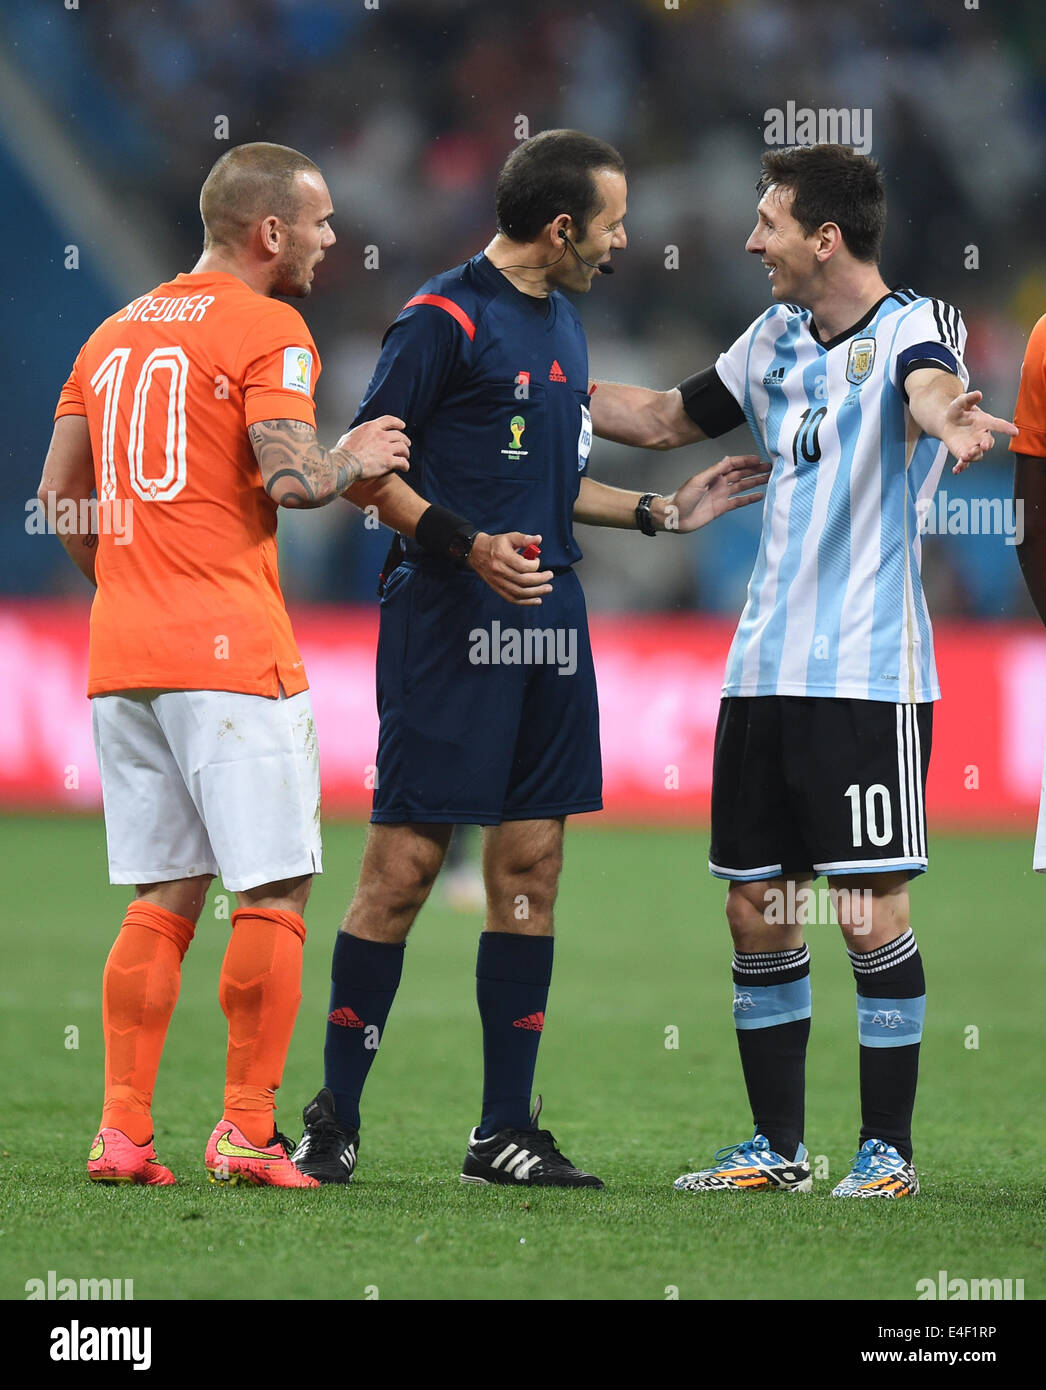 Sao Paulo, Brazil. 09th July, 2014. Turkish referee Cuneyt Cakir (C) talks to Argentina's Lionel Mesi (R) and Wesley Sneijder (L) of the Netherlands during the FIFA World Cup 2014 semi-final soccer match between the Netherlands and Argentina at the Arena Corinthians in Sao Paulo, Brazil, 09 July 2014. Photo: Marius Becker/dpa/Alamy Live News Stock Photo